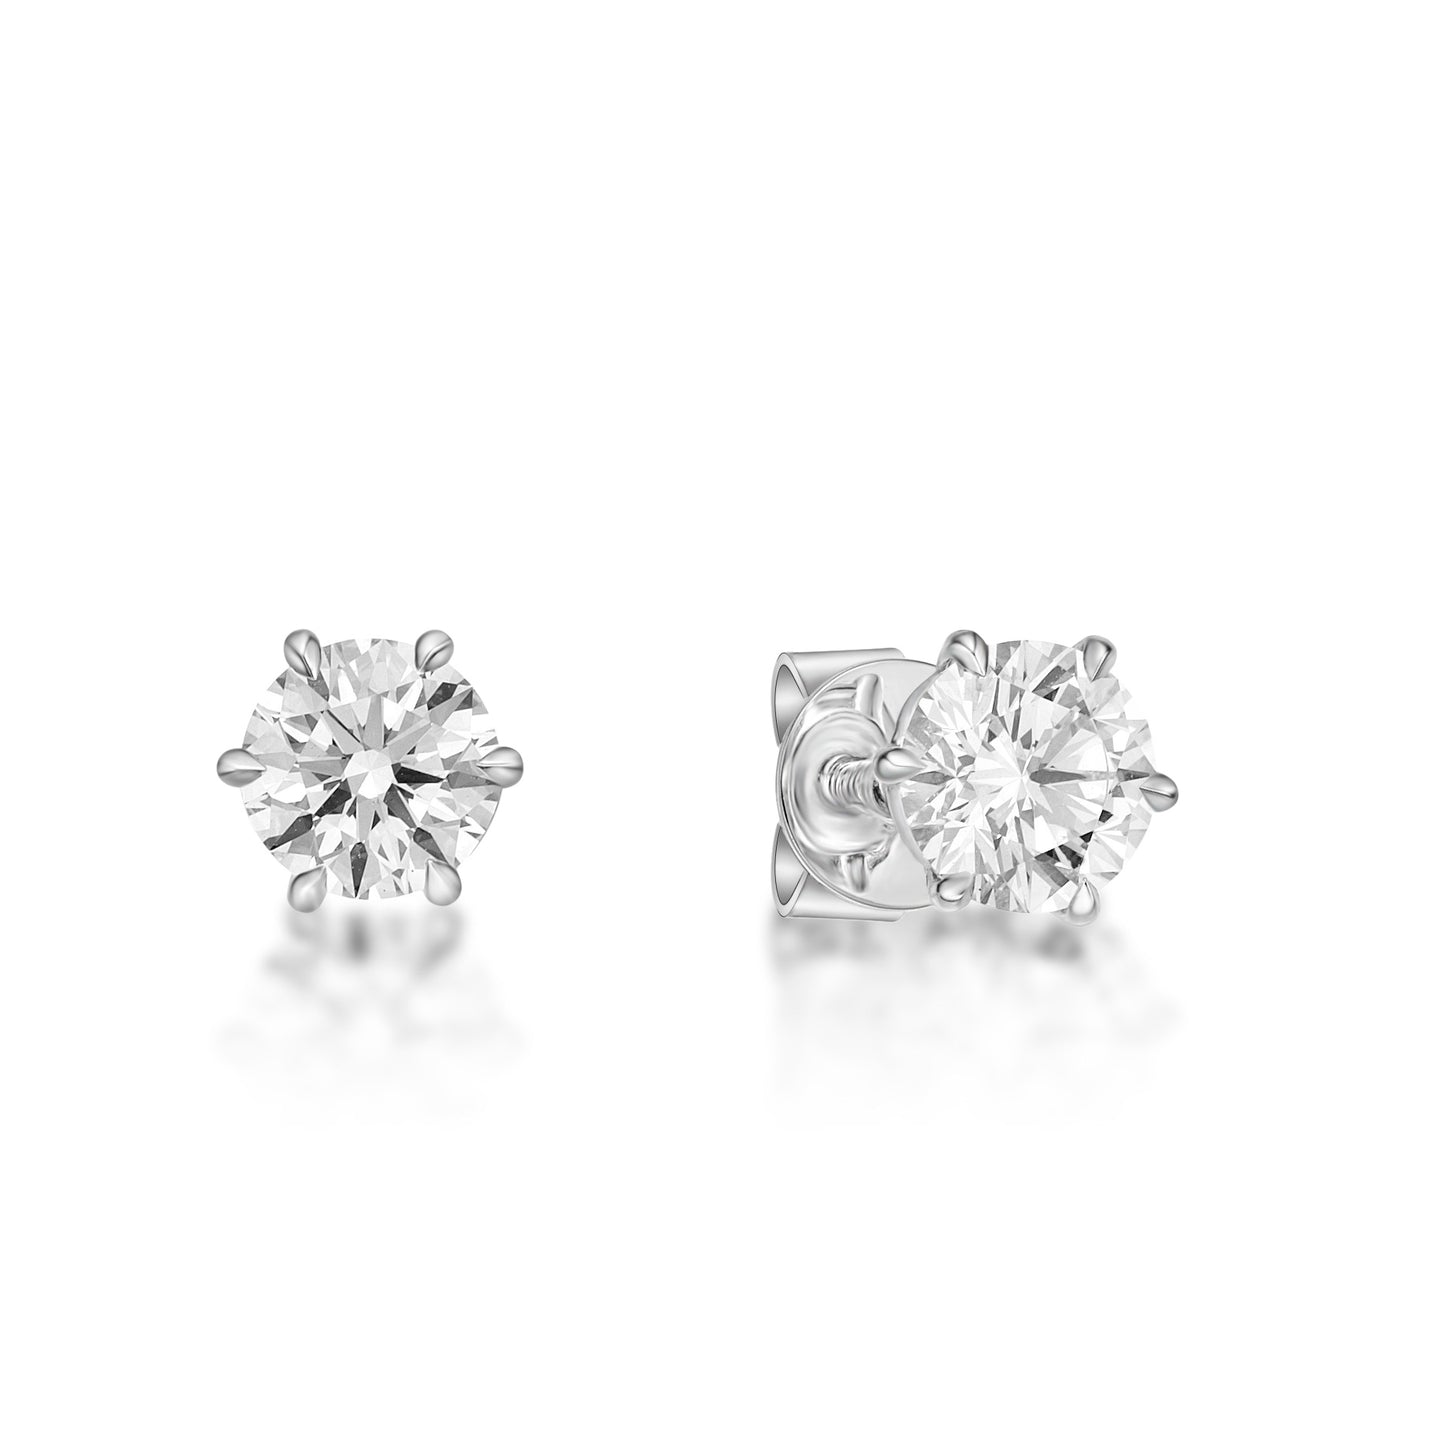 50pt Round Brilliant diamond six-claw stud earrings in 18K White Gold